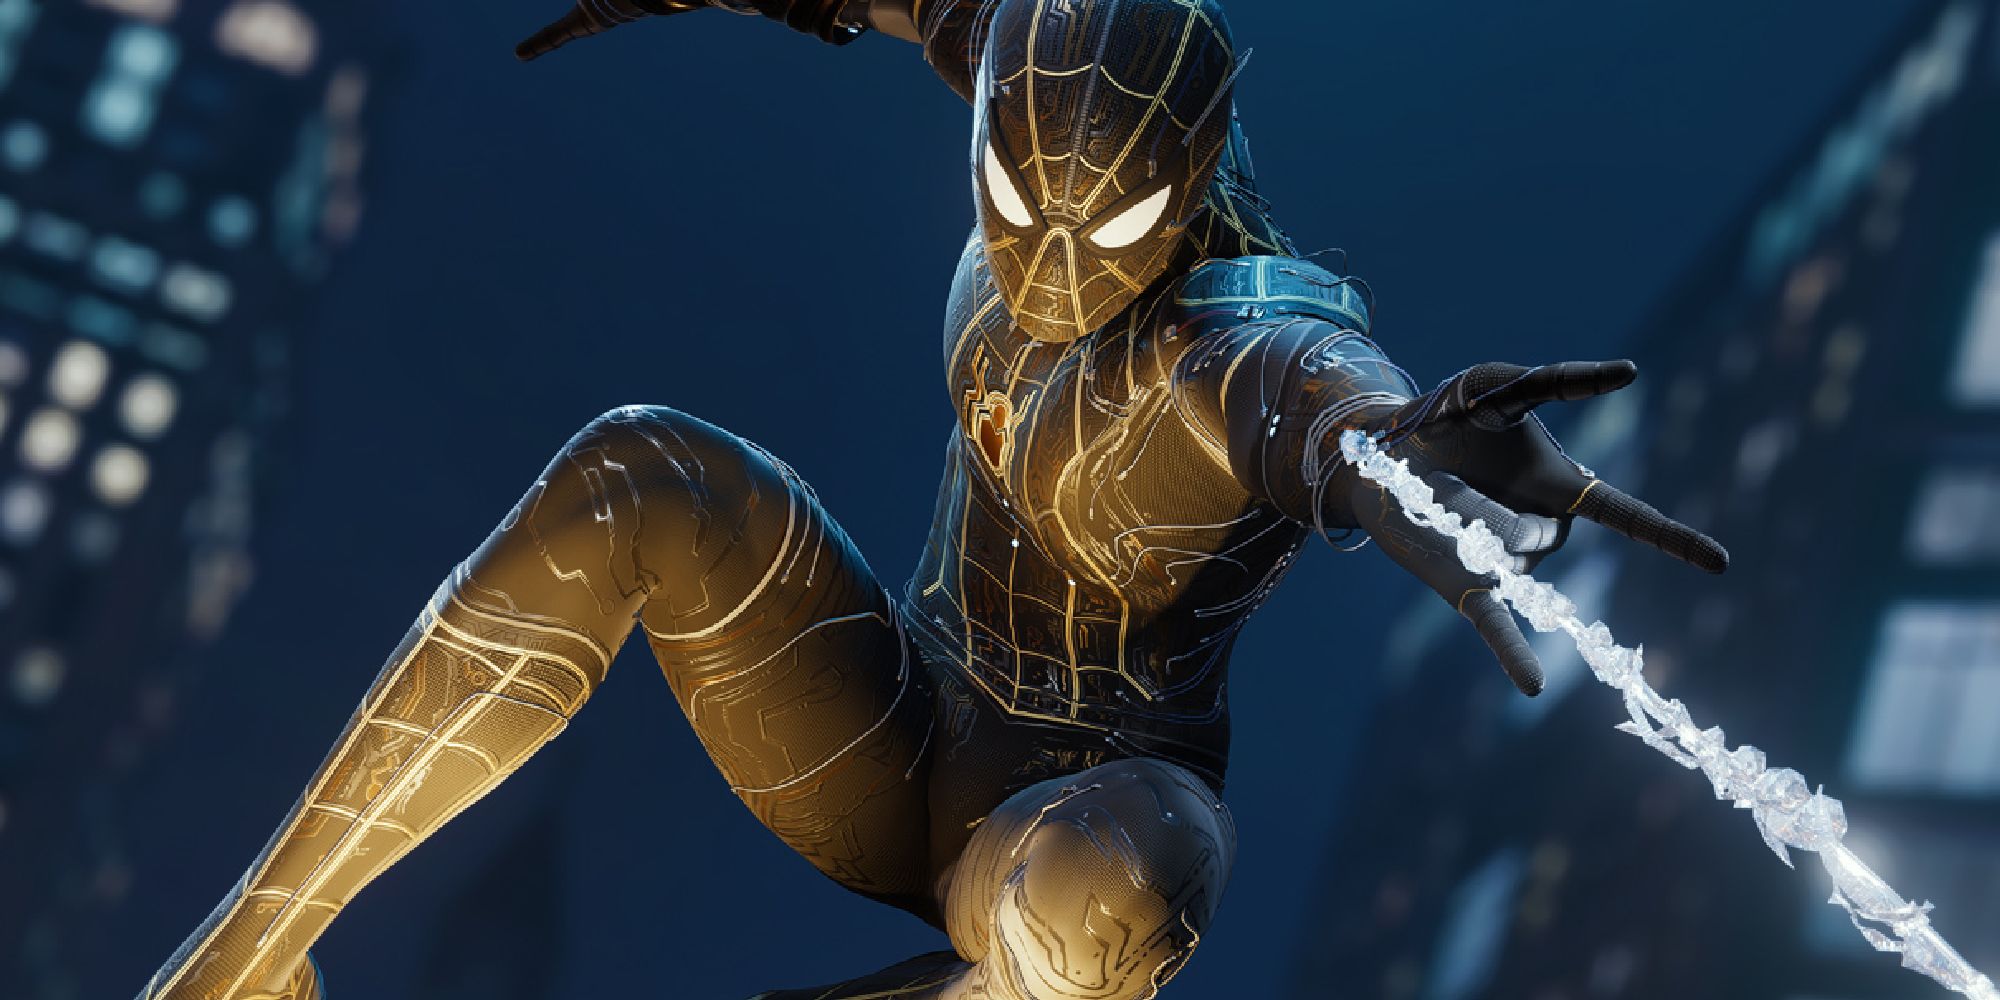 Spider-Man wearing the black and gold magic MCU suit, swinging